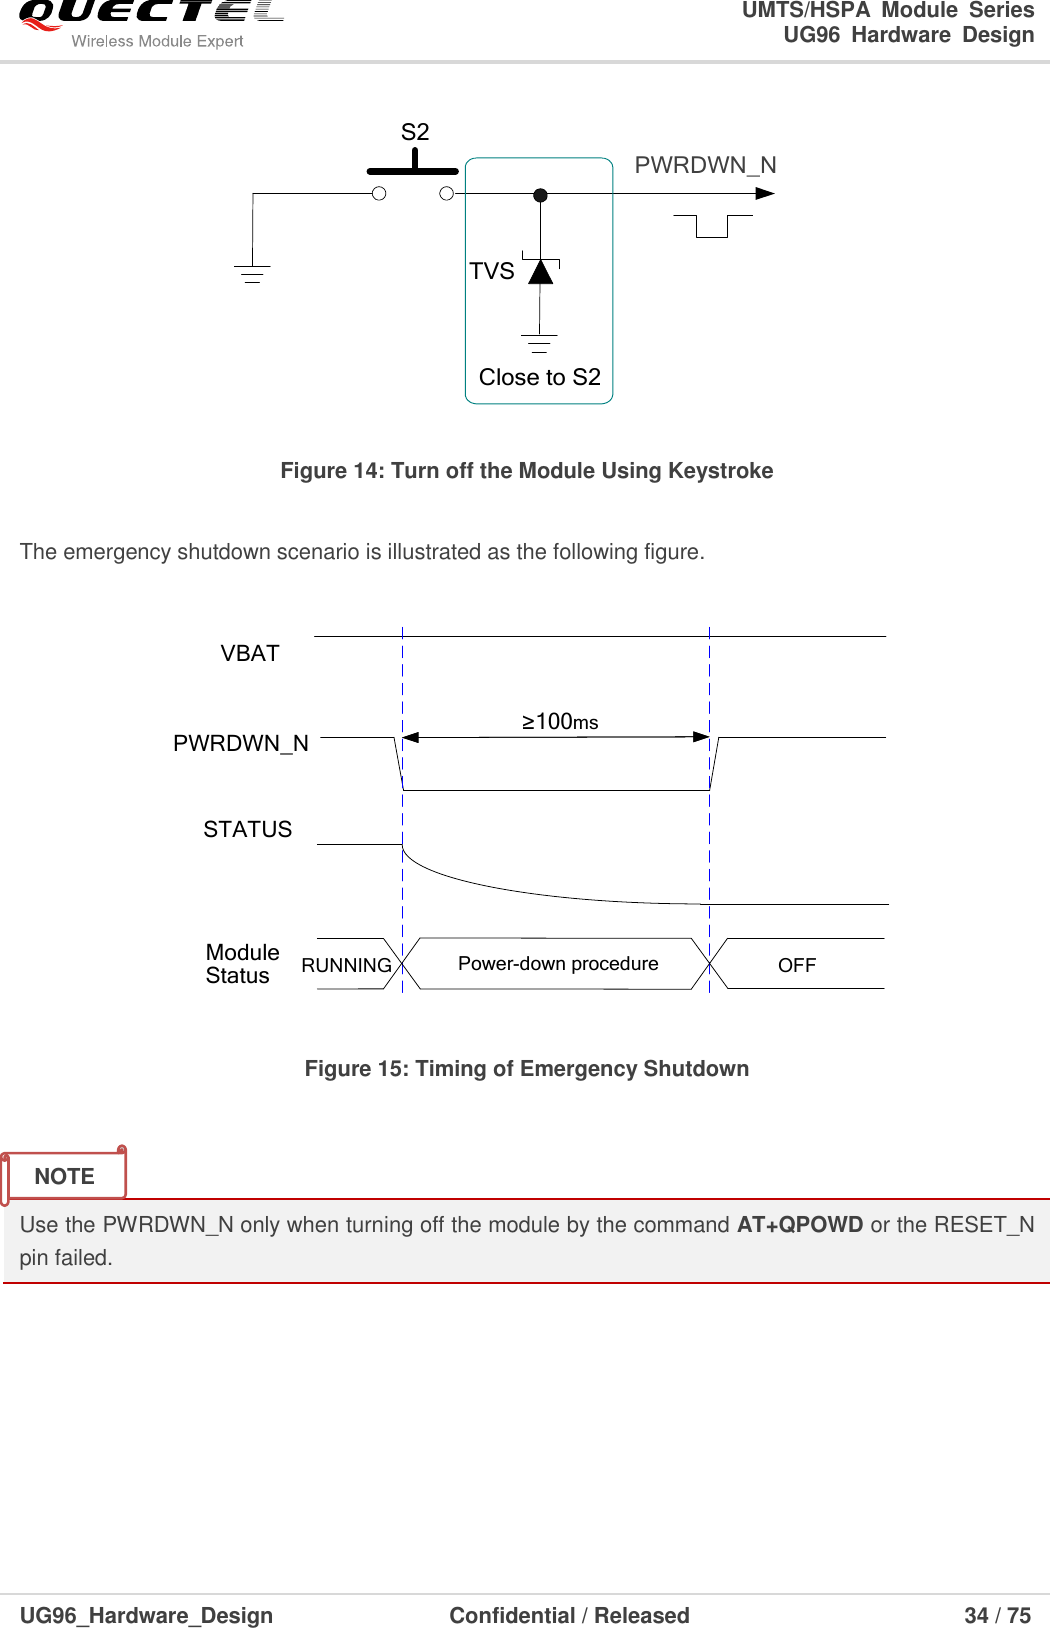                                                                        UMTS/HSPA  Module  Series                                                                 UG96  Hardware  Design  UG96_Hardware_Design                  Confidential / Released                             34 / 75    PWRDWN_NS2Close to S2TVS Figure 14: Turn off the Module Using Keystroke  The emergency shutdown scenario is illustrated as the following figure.  VBATPWRDWN_N≥100msRUNNING Power-down procedure OFFSTATUSModuleStatus Figure 15: Timing of Emergency Shutdown   Use the PWRDWN_N only when turning off the module by the command AT+QPOWD or the RESET_N pin failed.        NOTE 